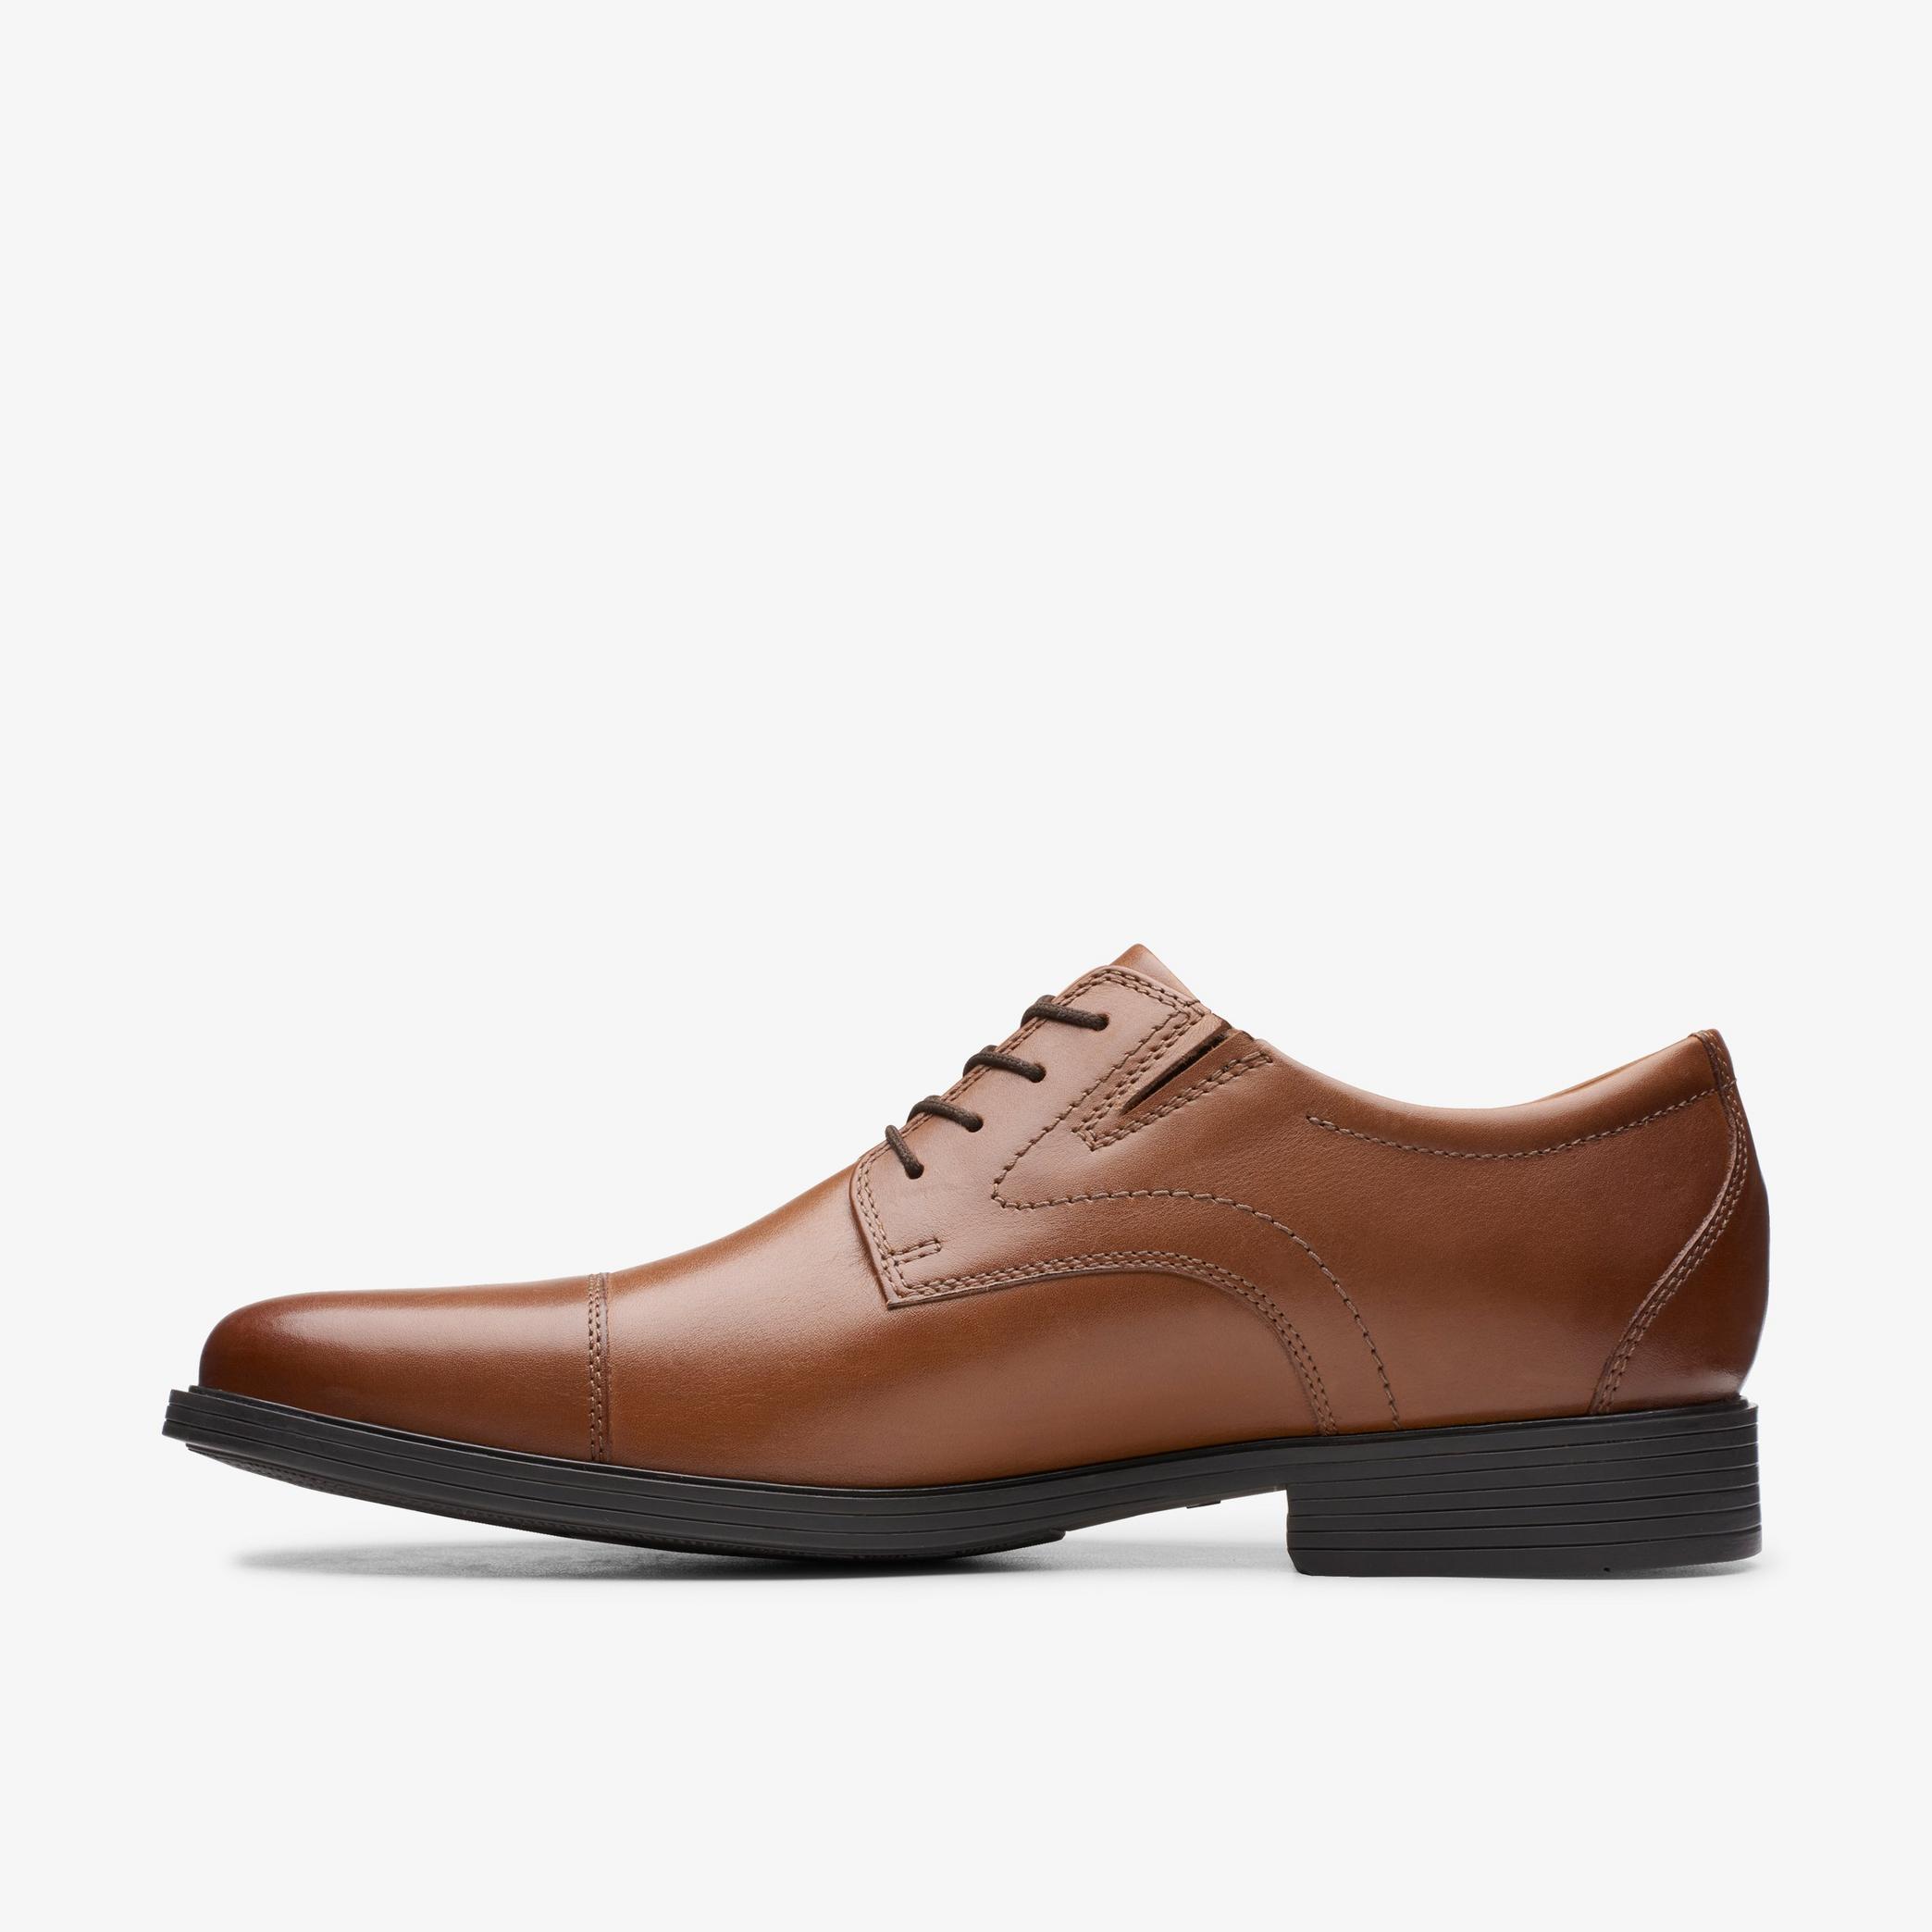 Whiddon Cap Dark Tan Leather Oxford Shoes, view 2 of 6